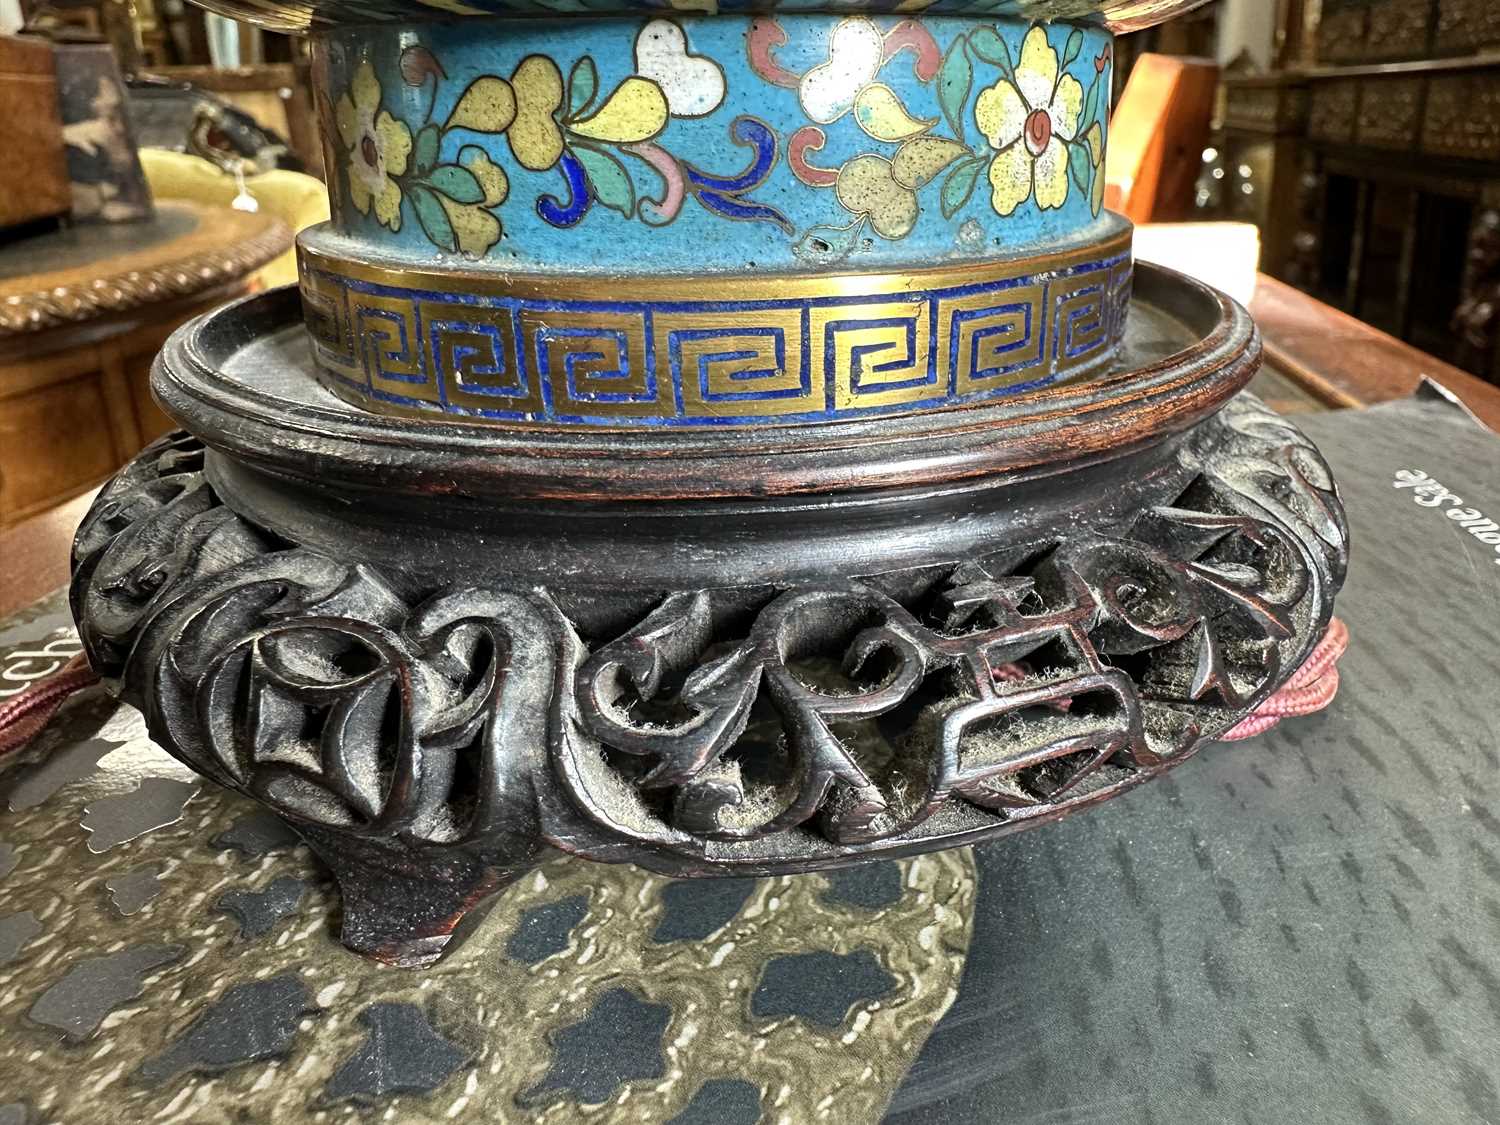 A LATE 19TH/EARLY 20TH CENTURY CENTURY CHINESE CLOISONNE VASE LAMP - Image 17 of 34